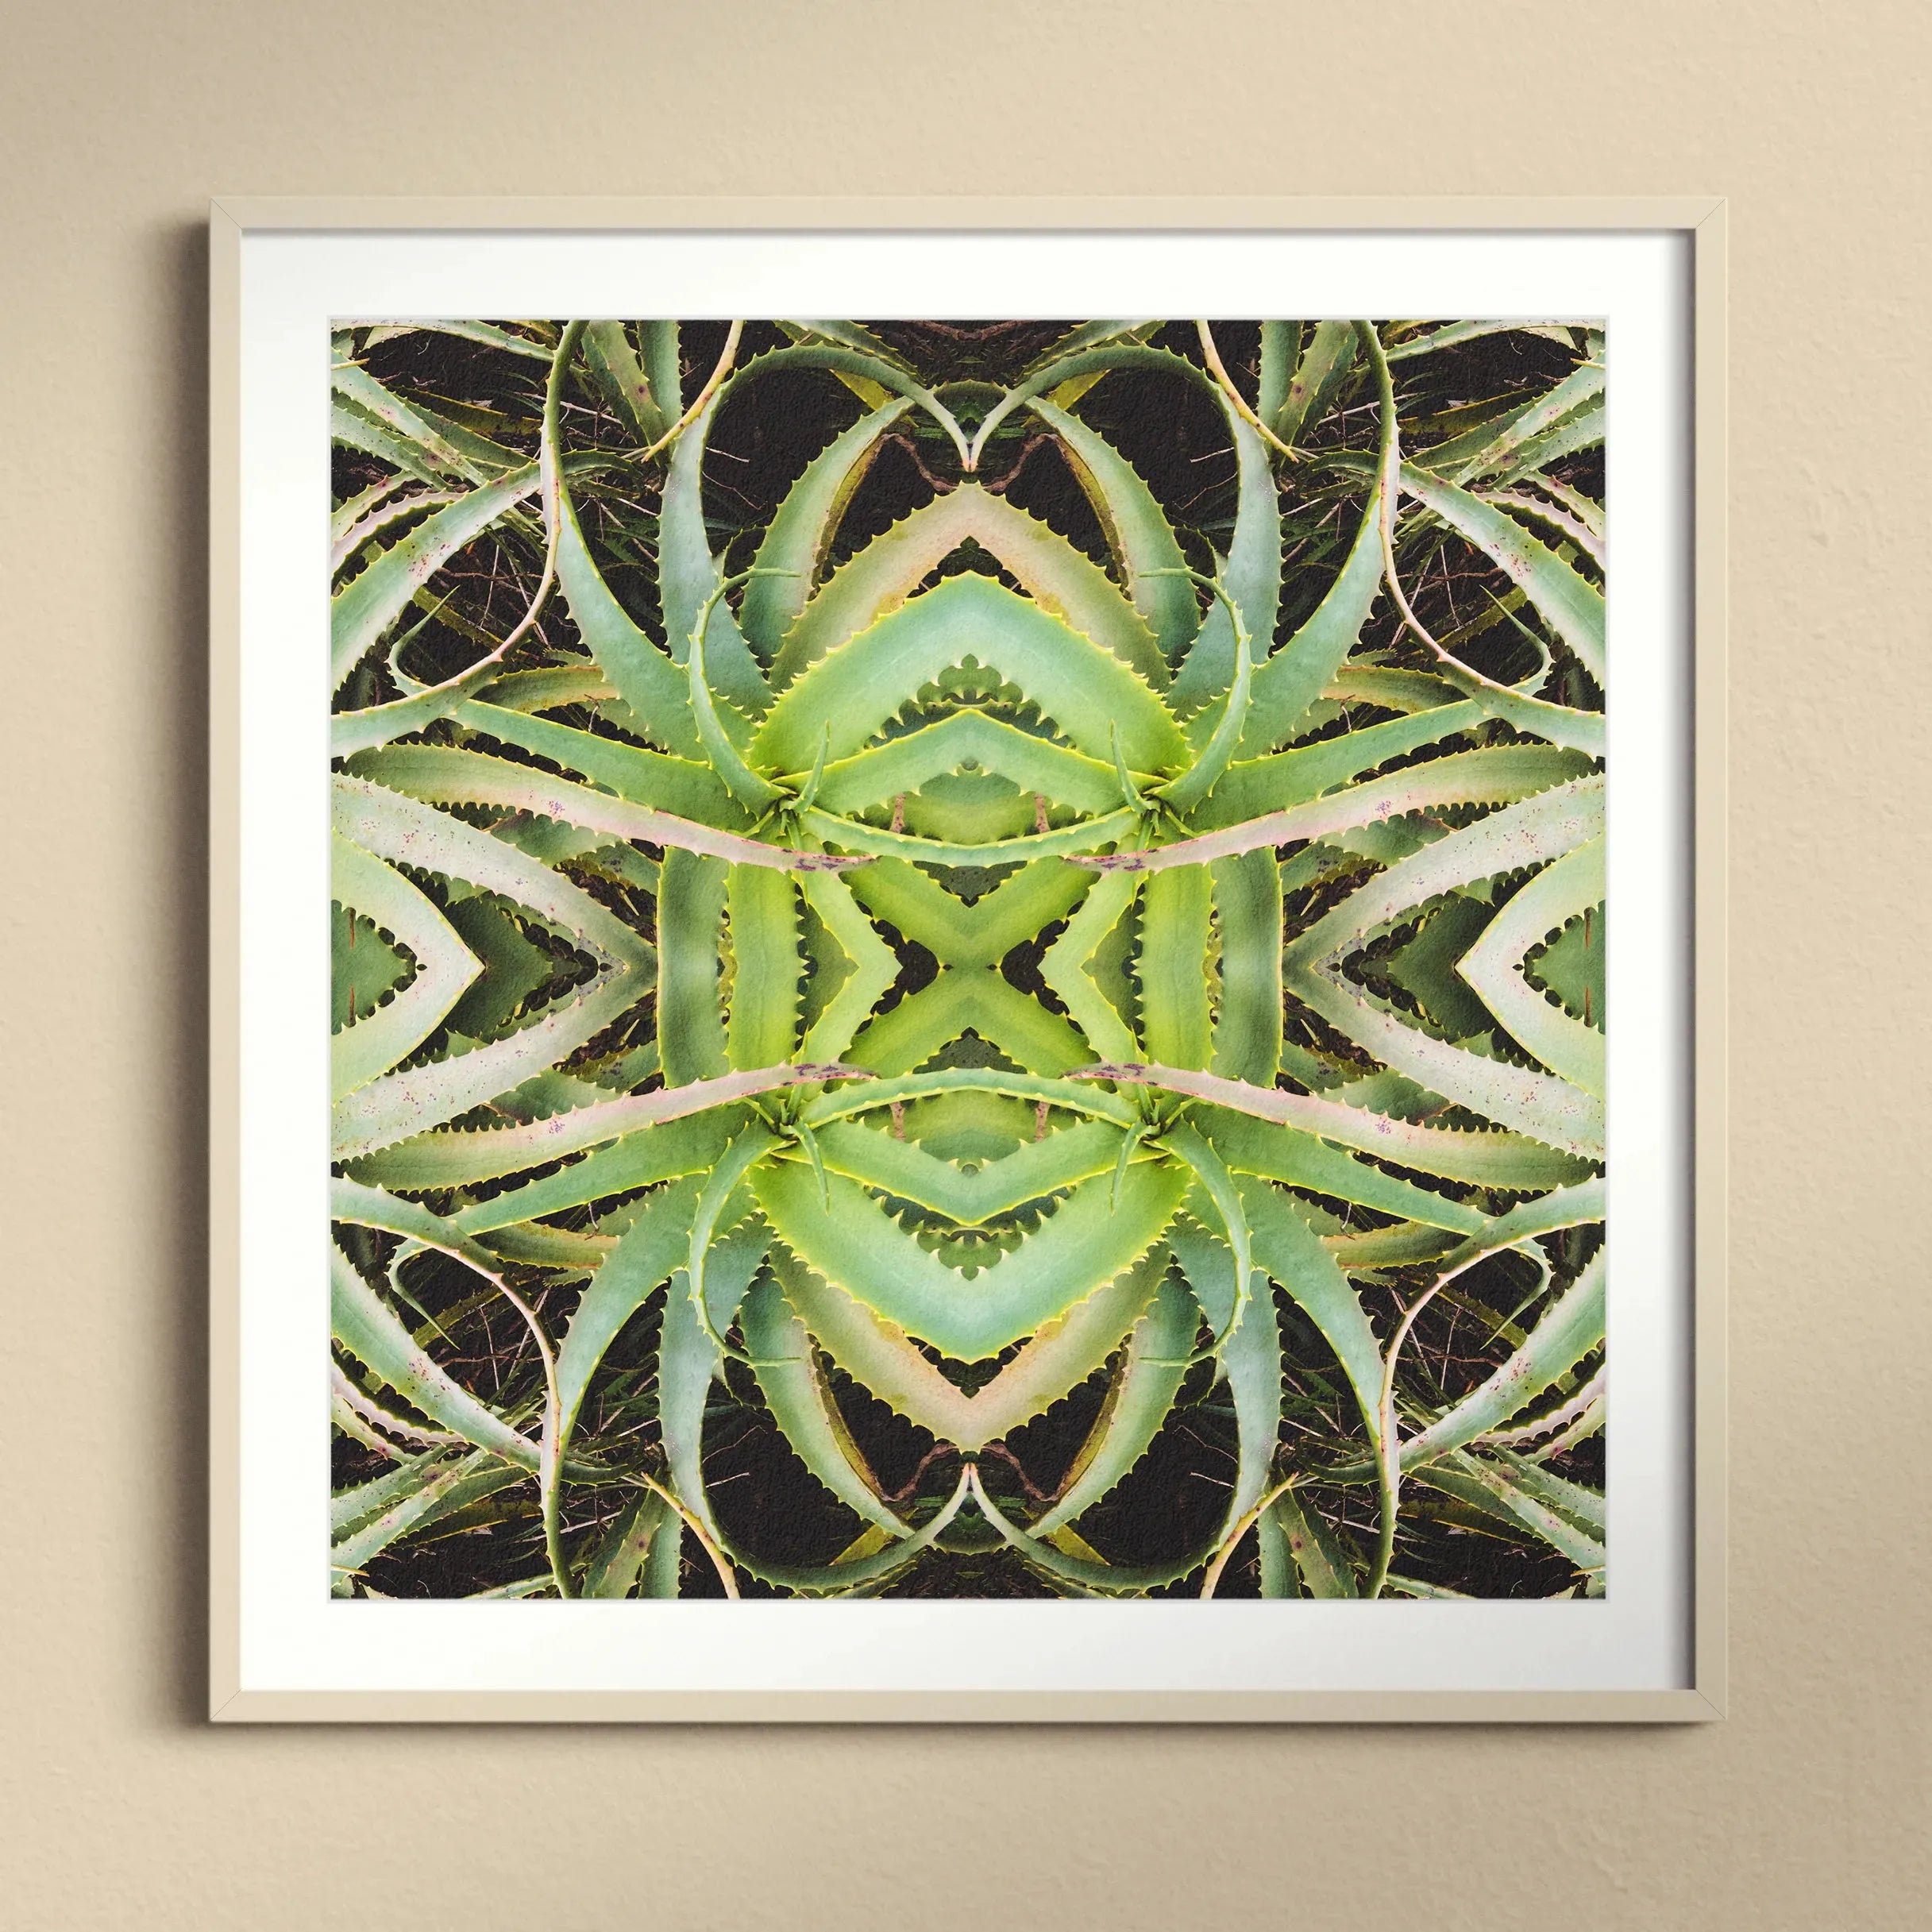 Spiked Too Framed & Mounted Print - Posters Prints & Visual Artwork - Aesthetic Art